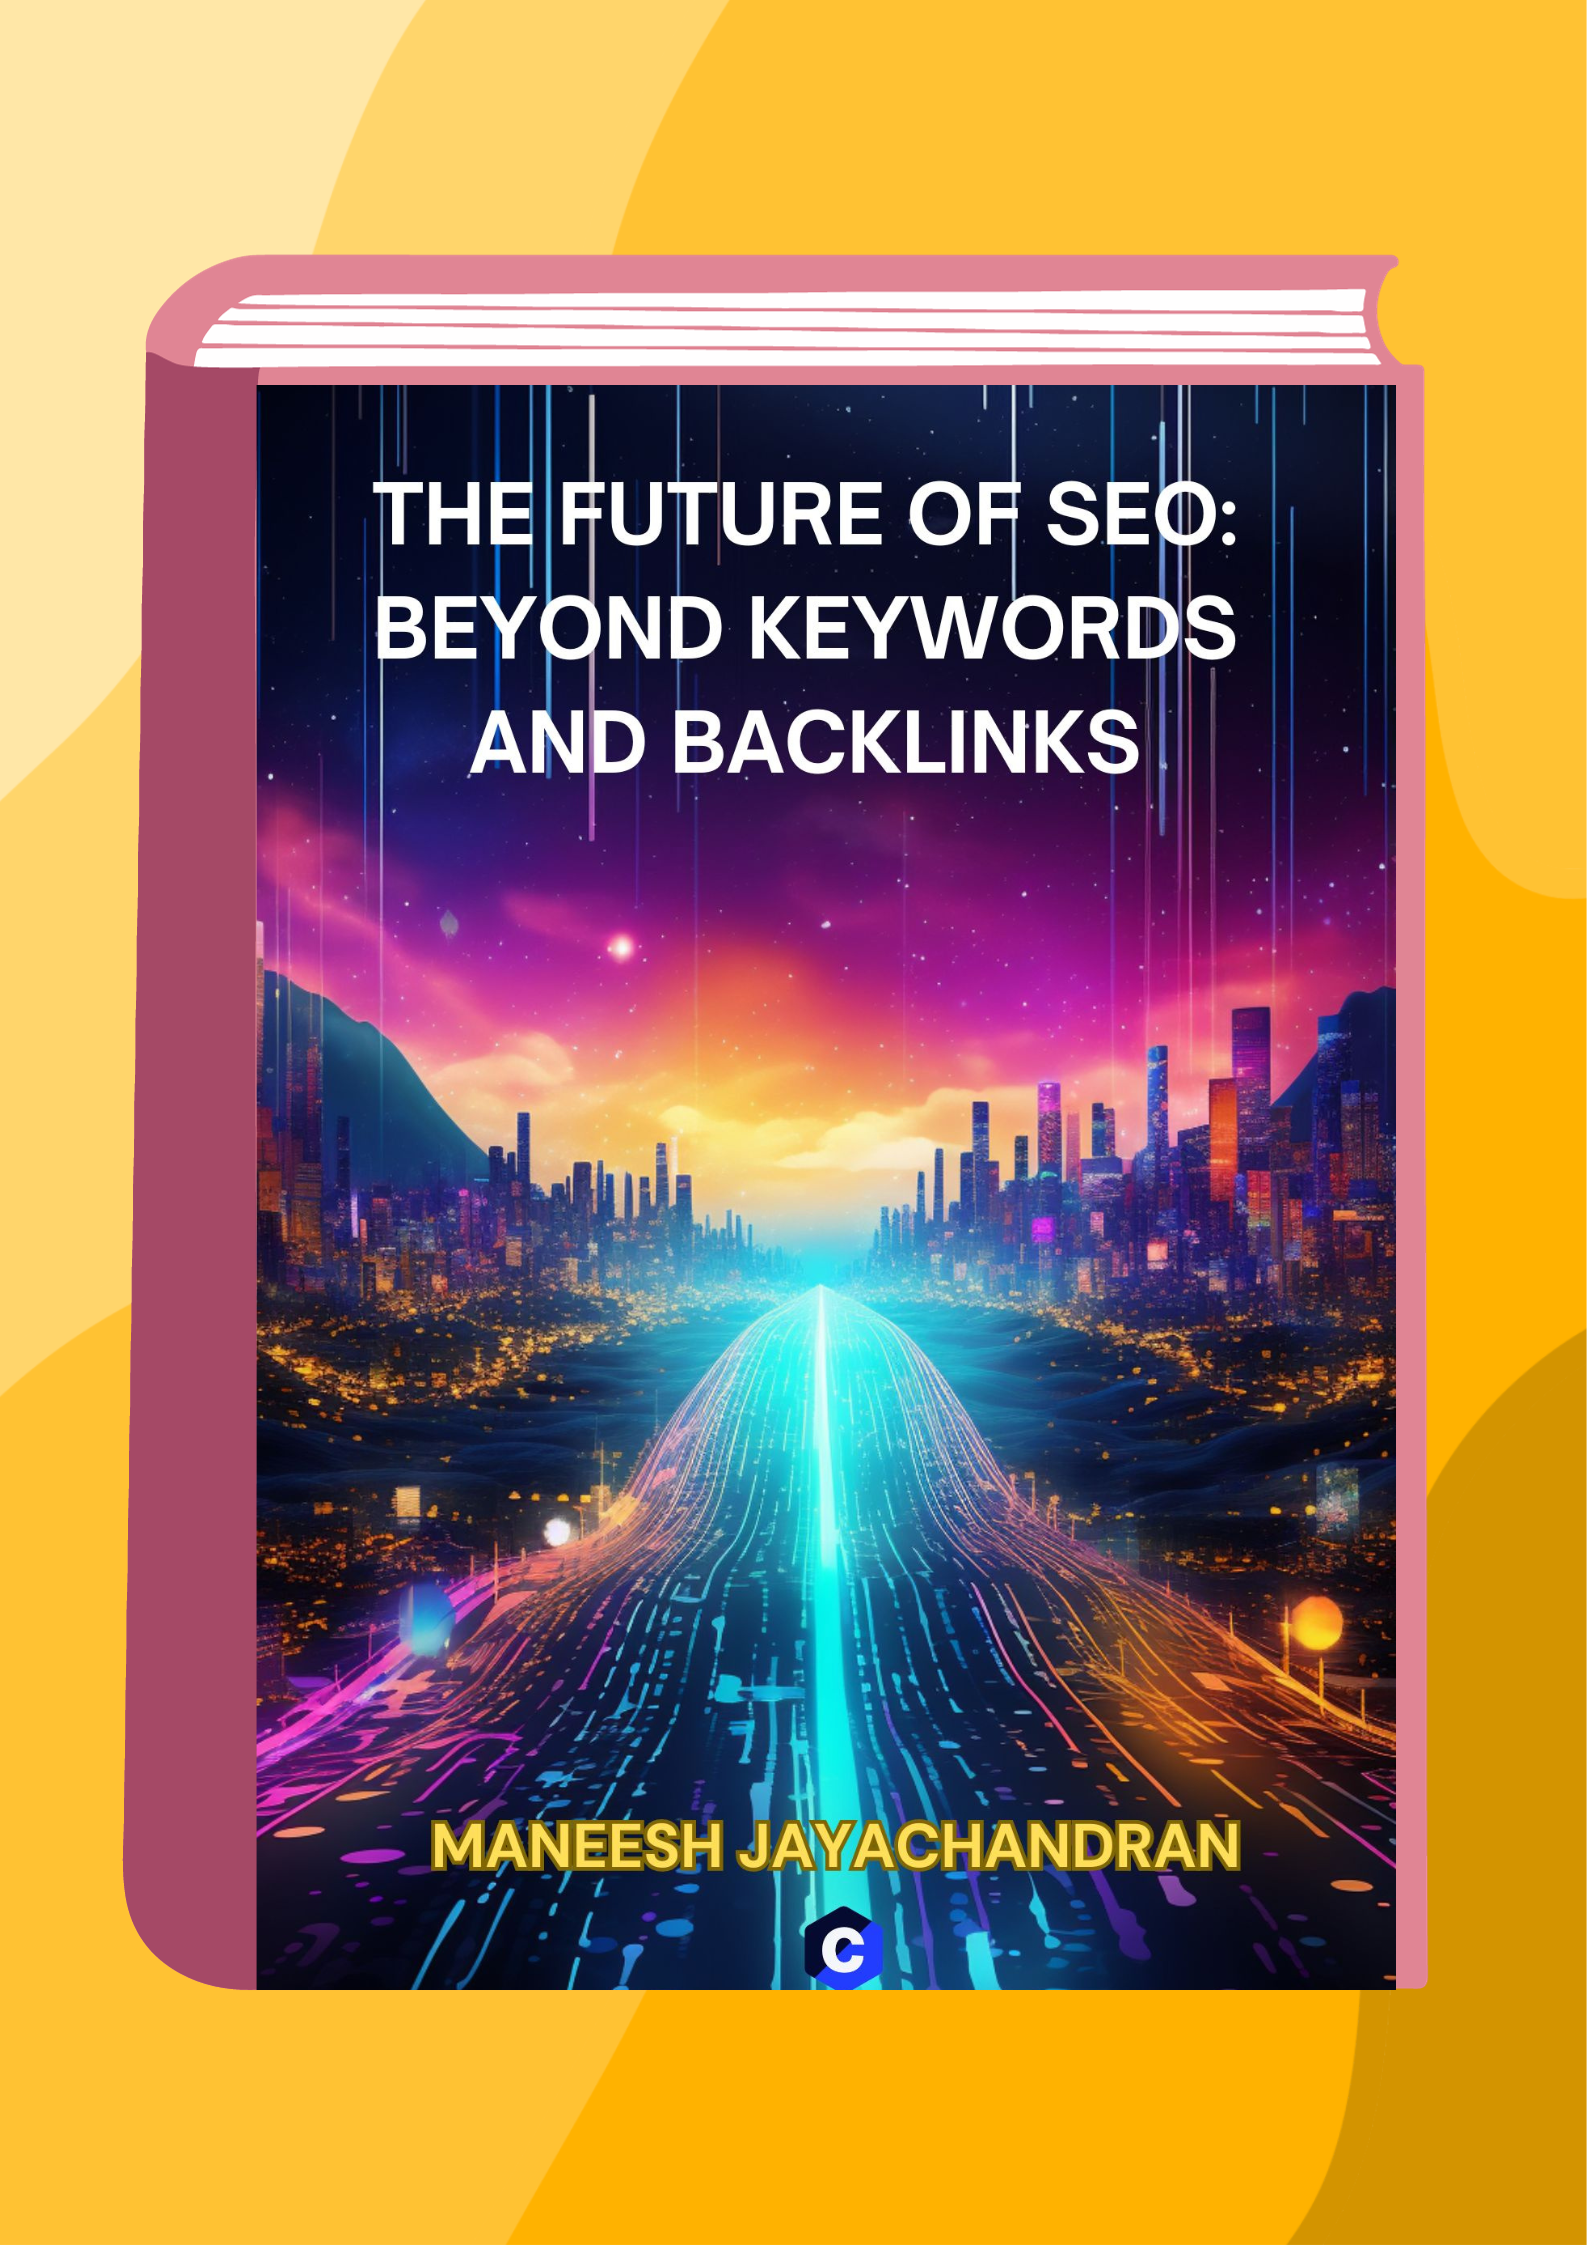 Buy the book 'The Future of SEO: Beyond Keywords and Backlinks'